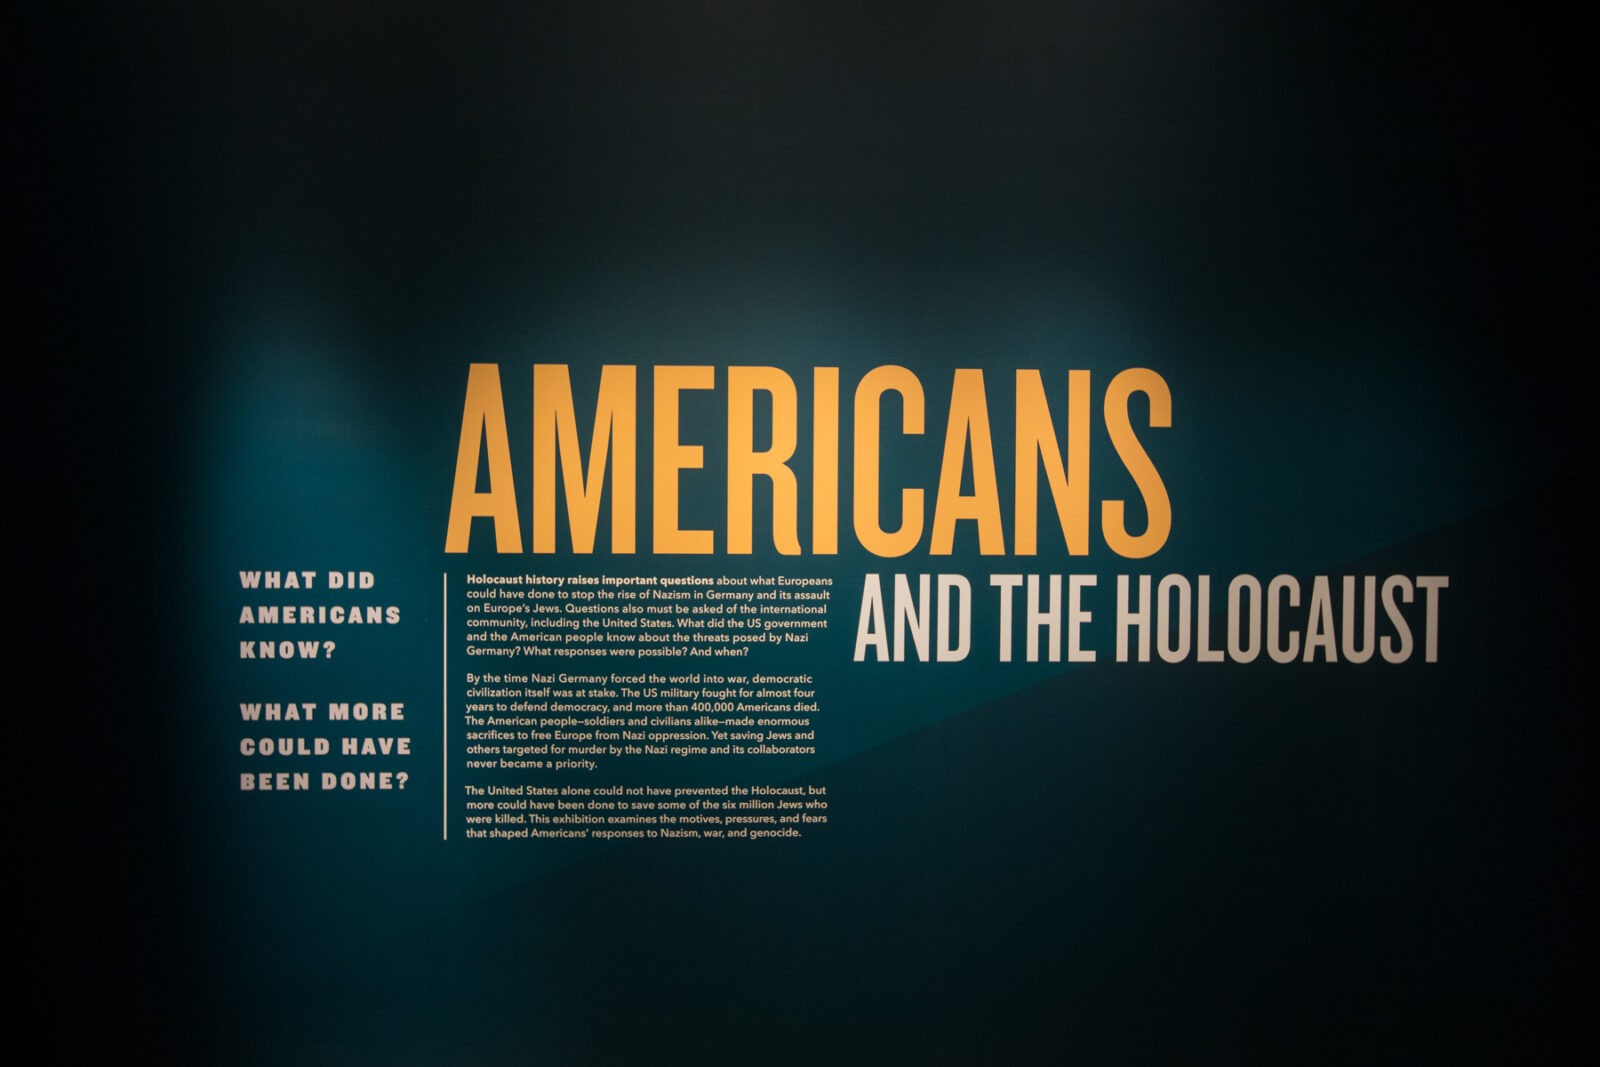 8 April 2018, Days of Remembrance and 25th Anniversary, the first tours through the new "Americans and the Holocaust" exhibition.